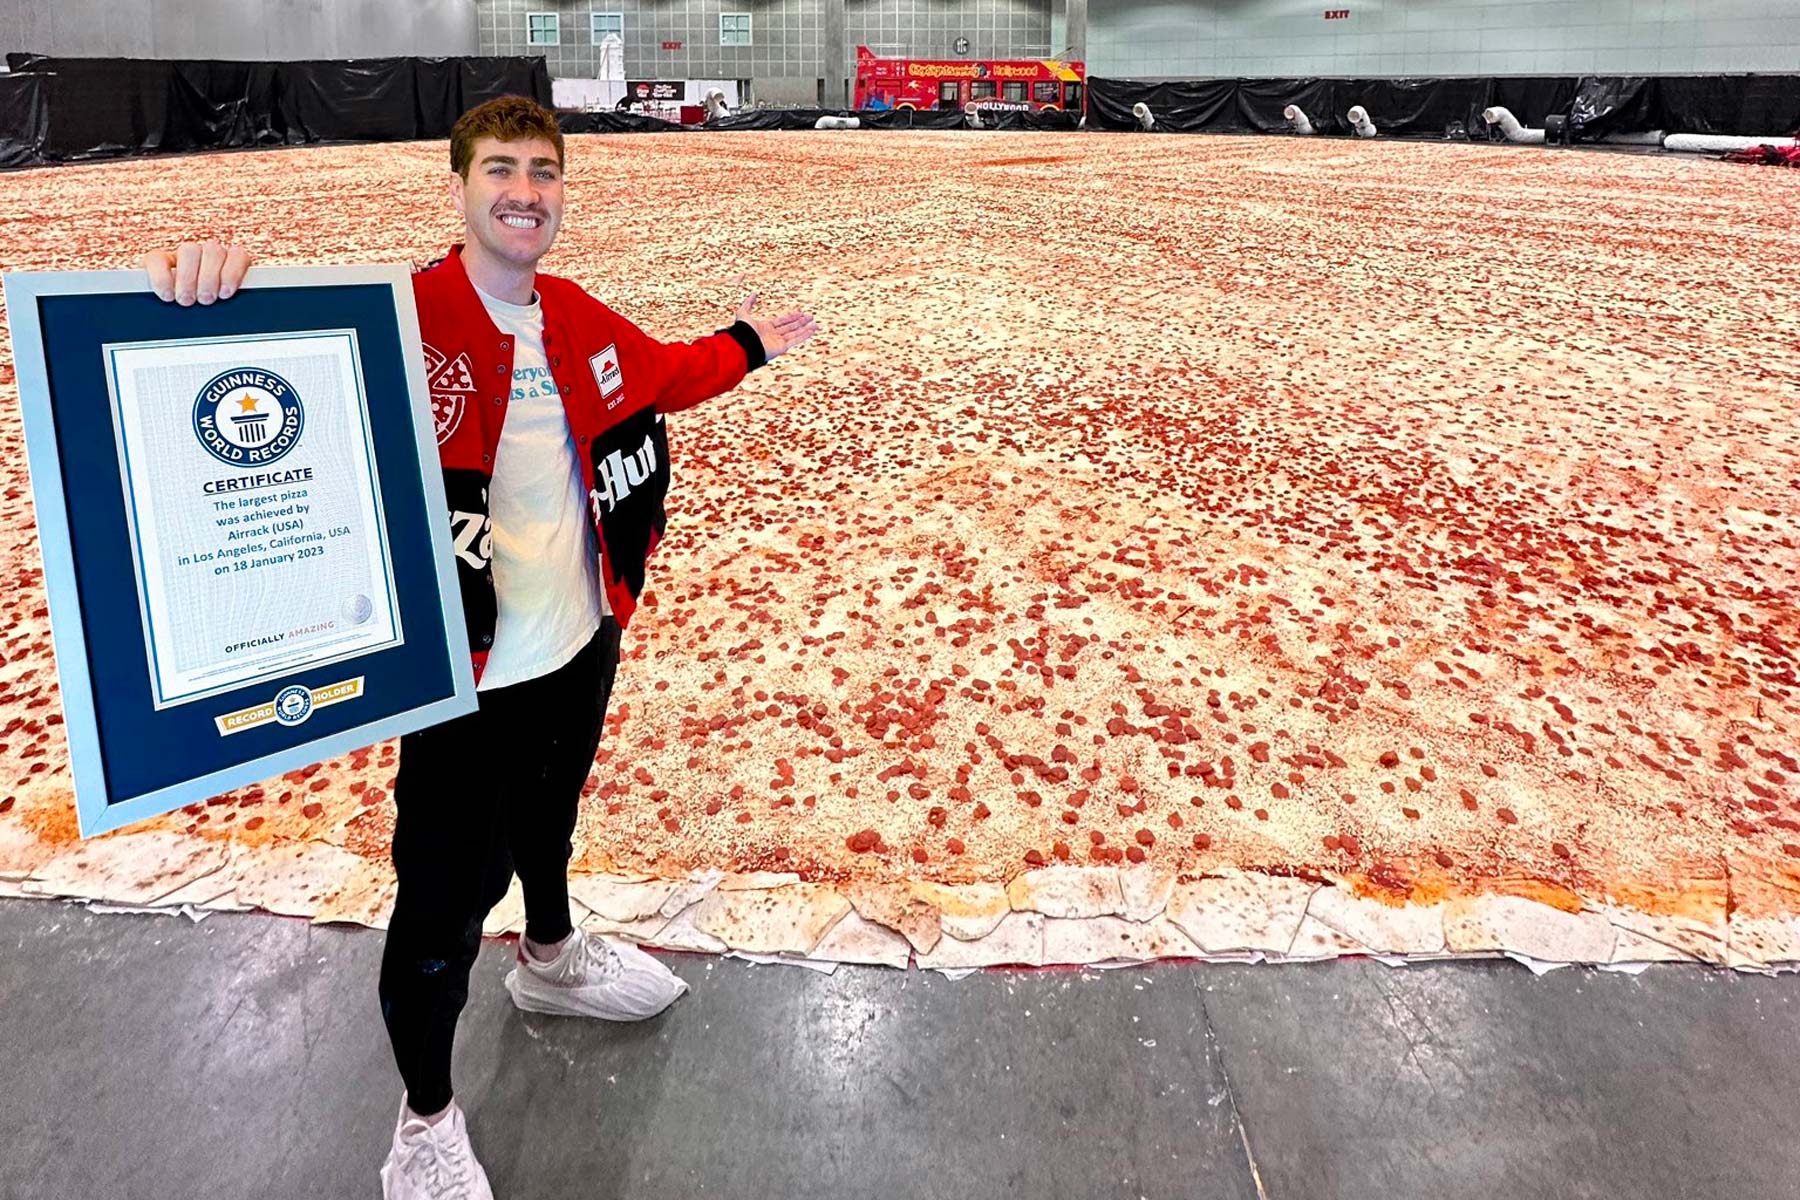 Pizza Guinness World Records Pizza HUT largest pizza world